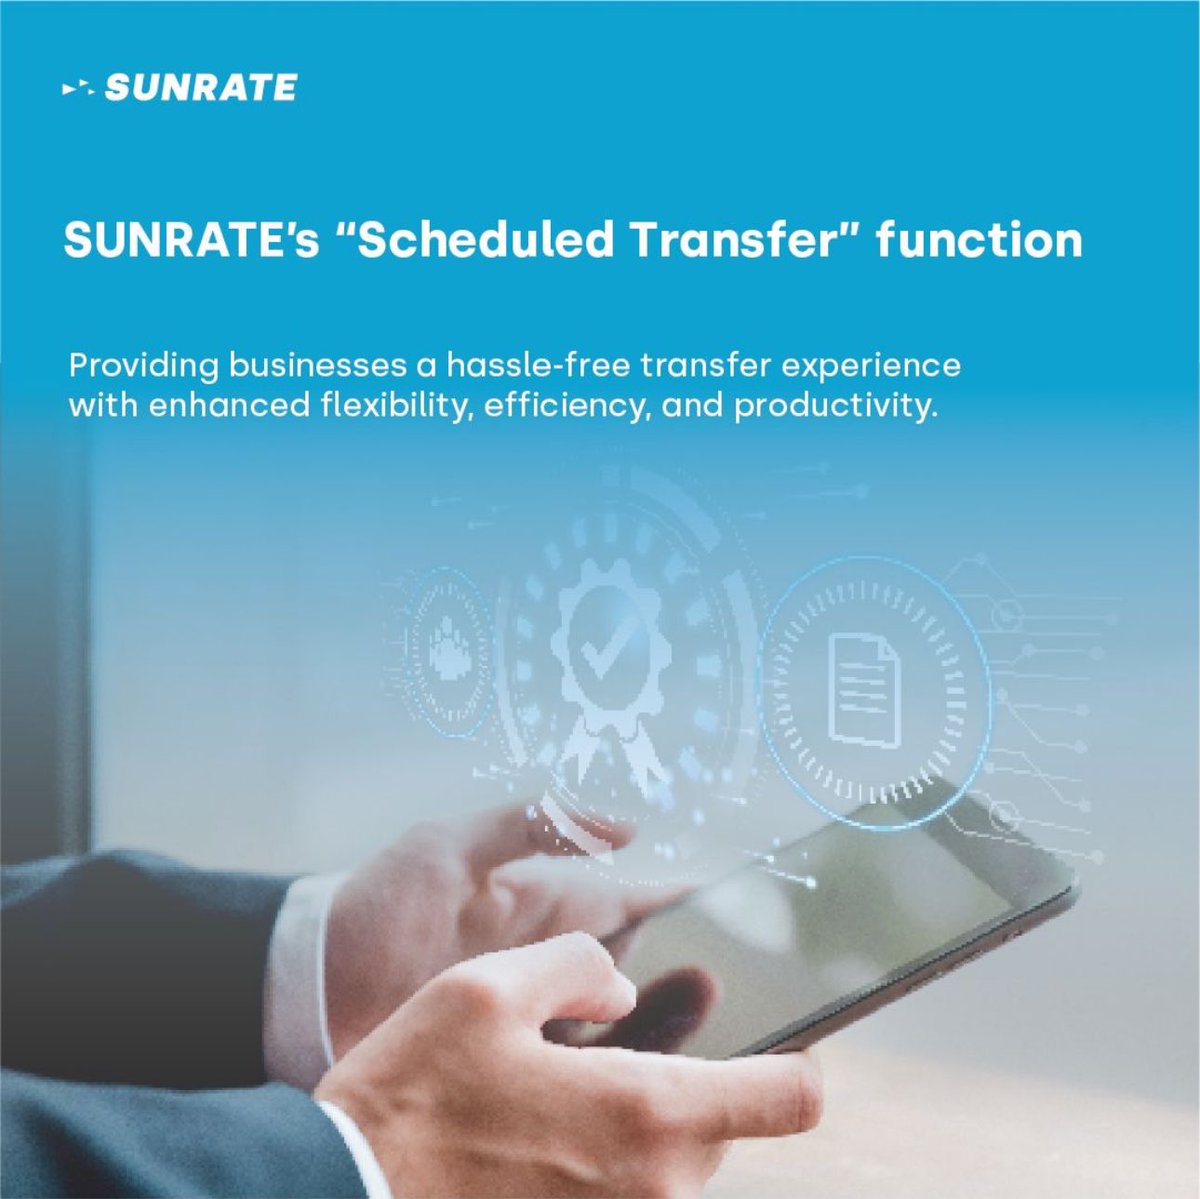 @SUNRATEofficial remains steadfast in our commitment to delivering secure and efficient cross-border business payments. We're excited to introduce the 'Schduled Transfer' function, designed to boost capital turnover efficiency. Read more here: sunrate.com/blog/how-sched…